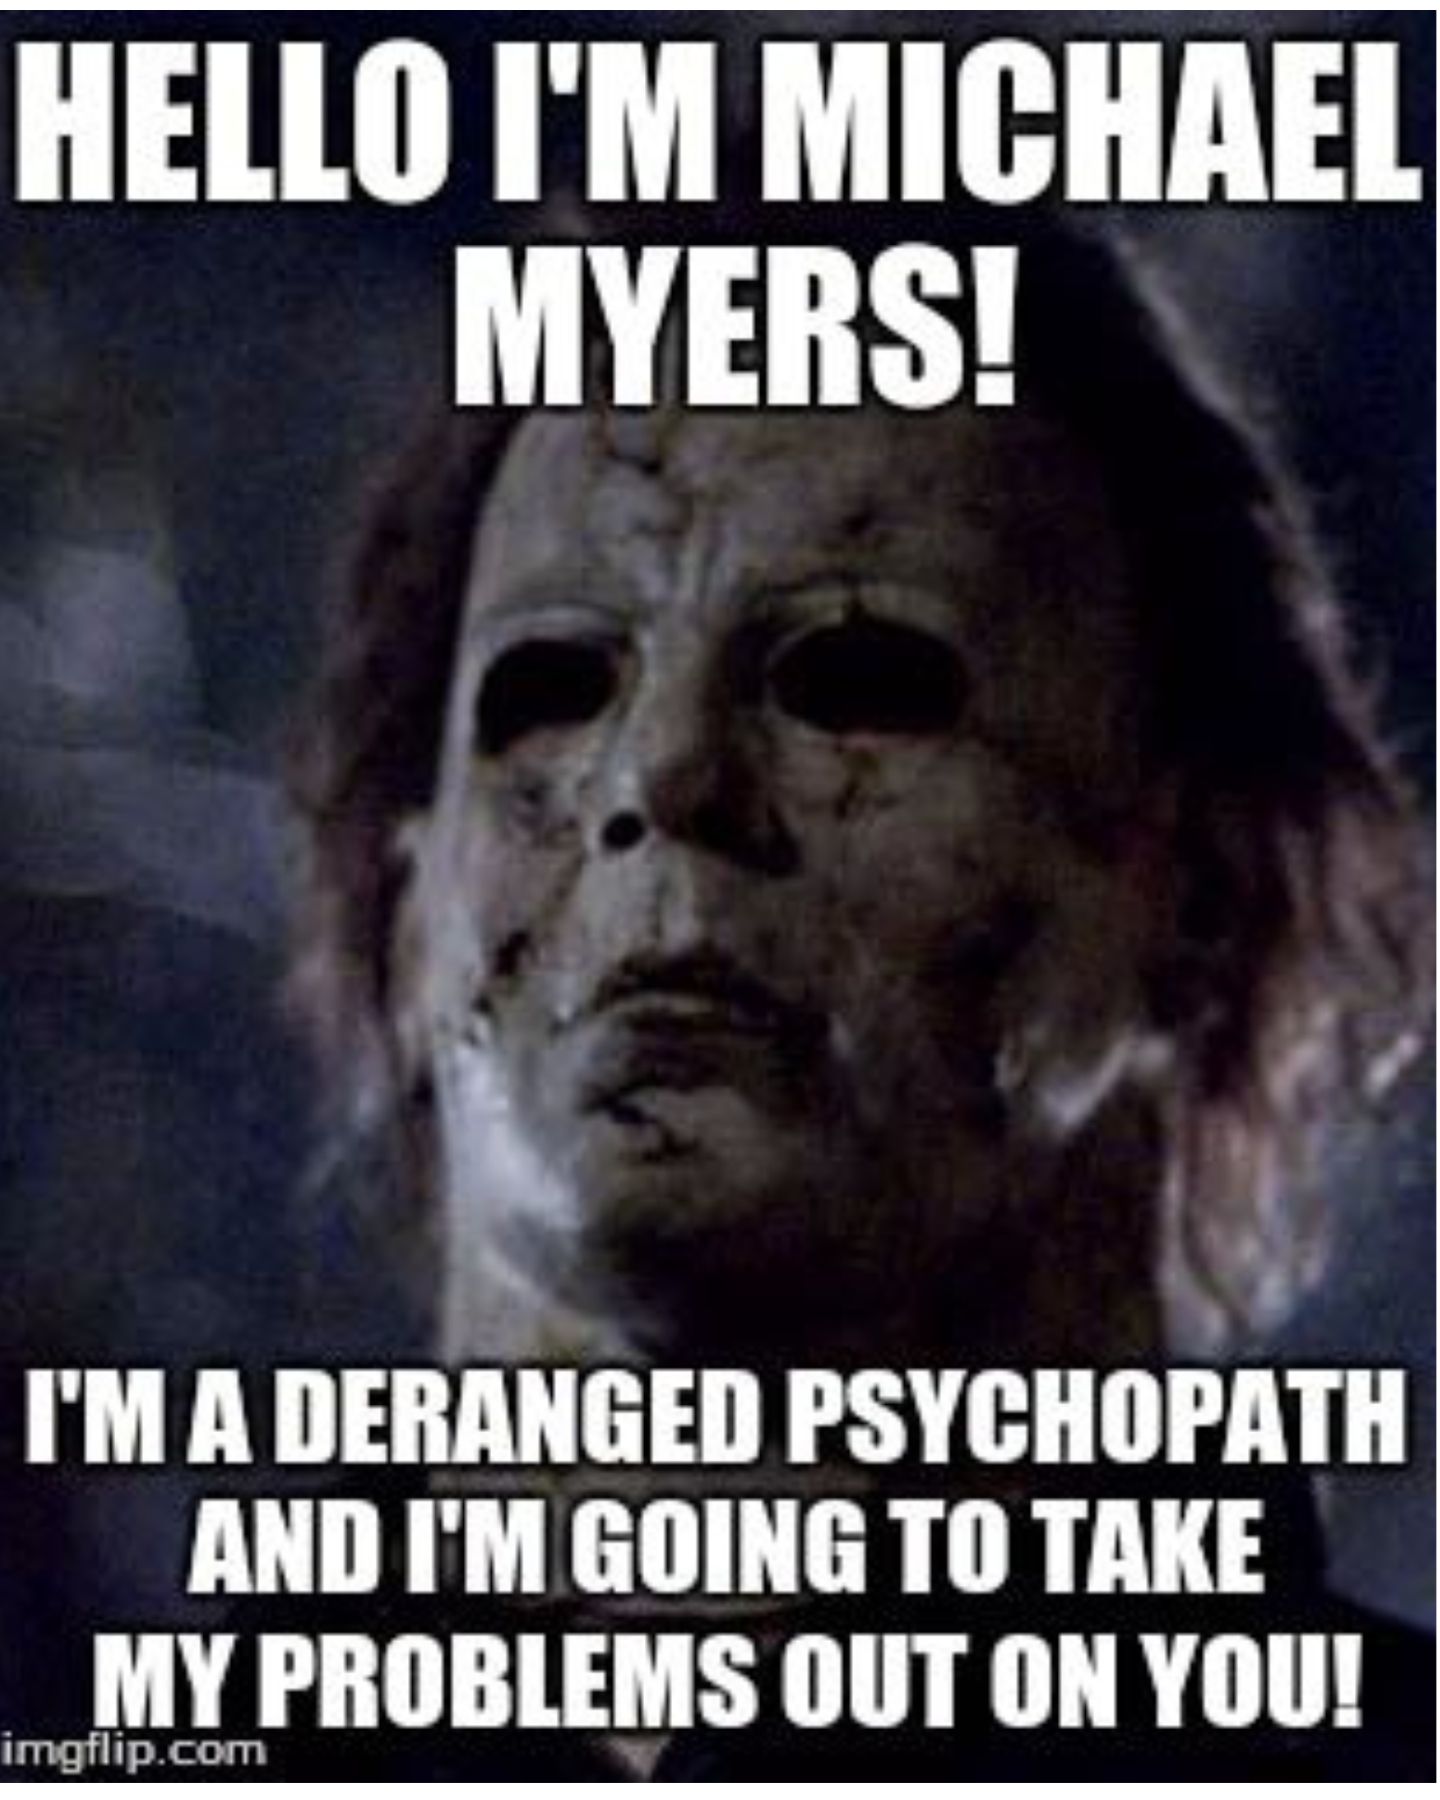 Meme about Michael Myers from Halloween. 